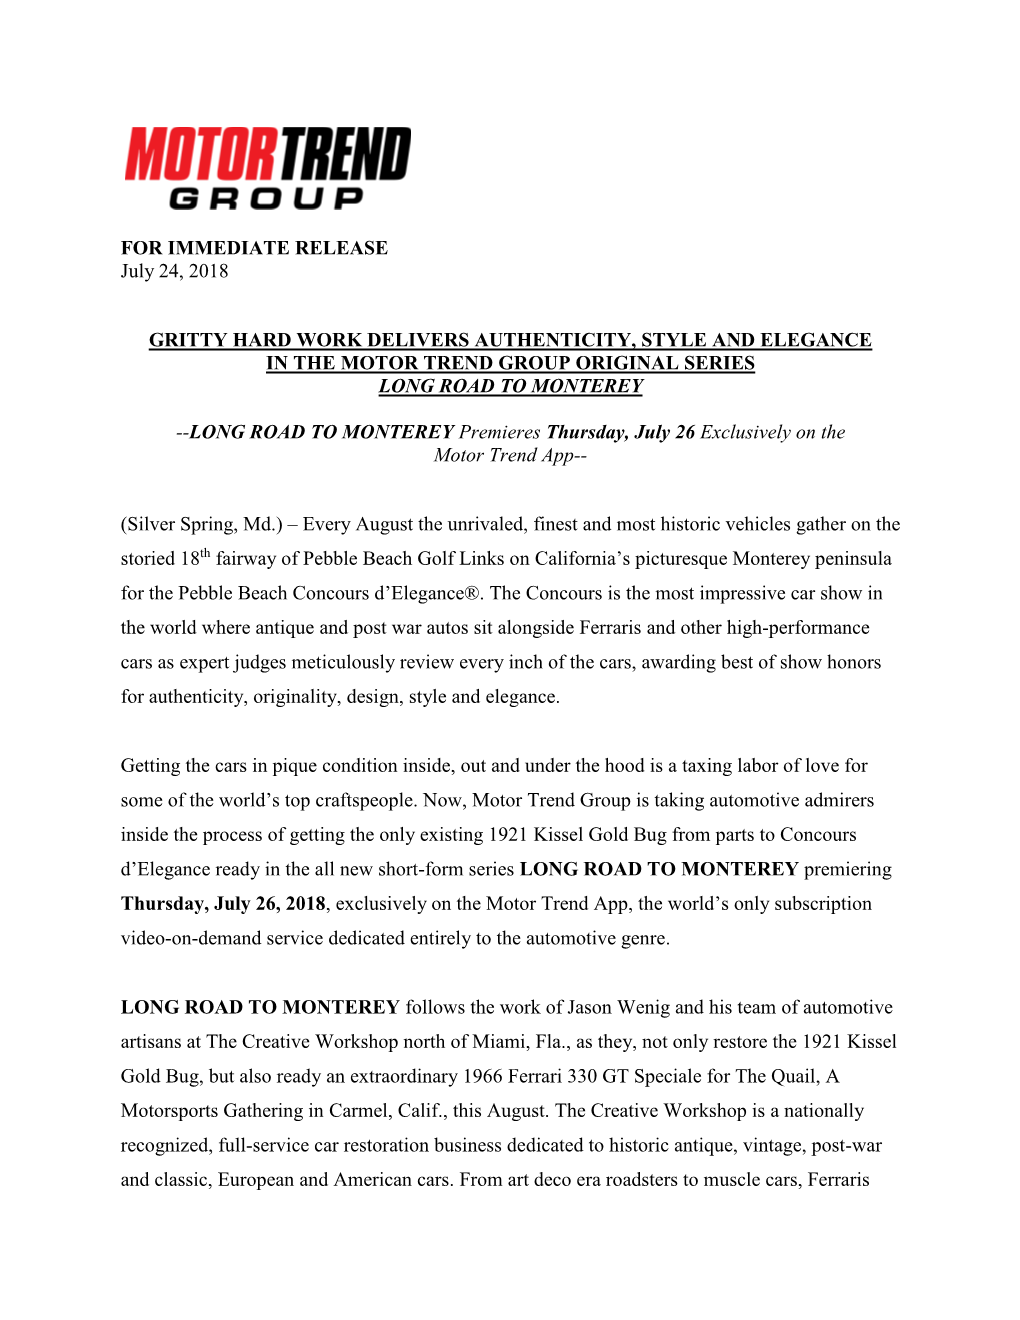 FOR IMMEDIATE RELEASE July 24, 2018 GRITTY HARD WORK DELIVERS AUTHENTICITY, STYLE and ELEGANCE in the MOTOR TREND GROUP ORIGINA